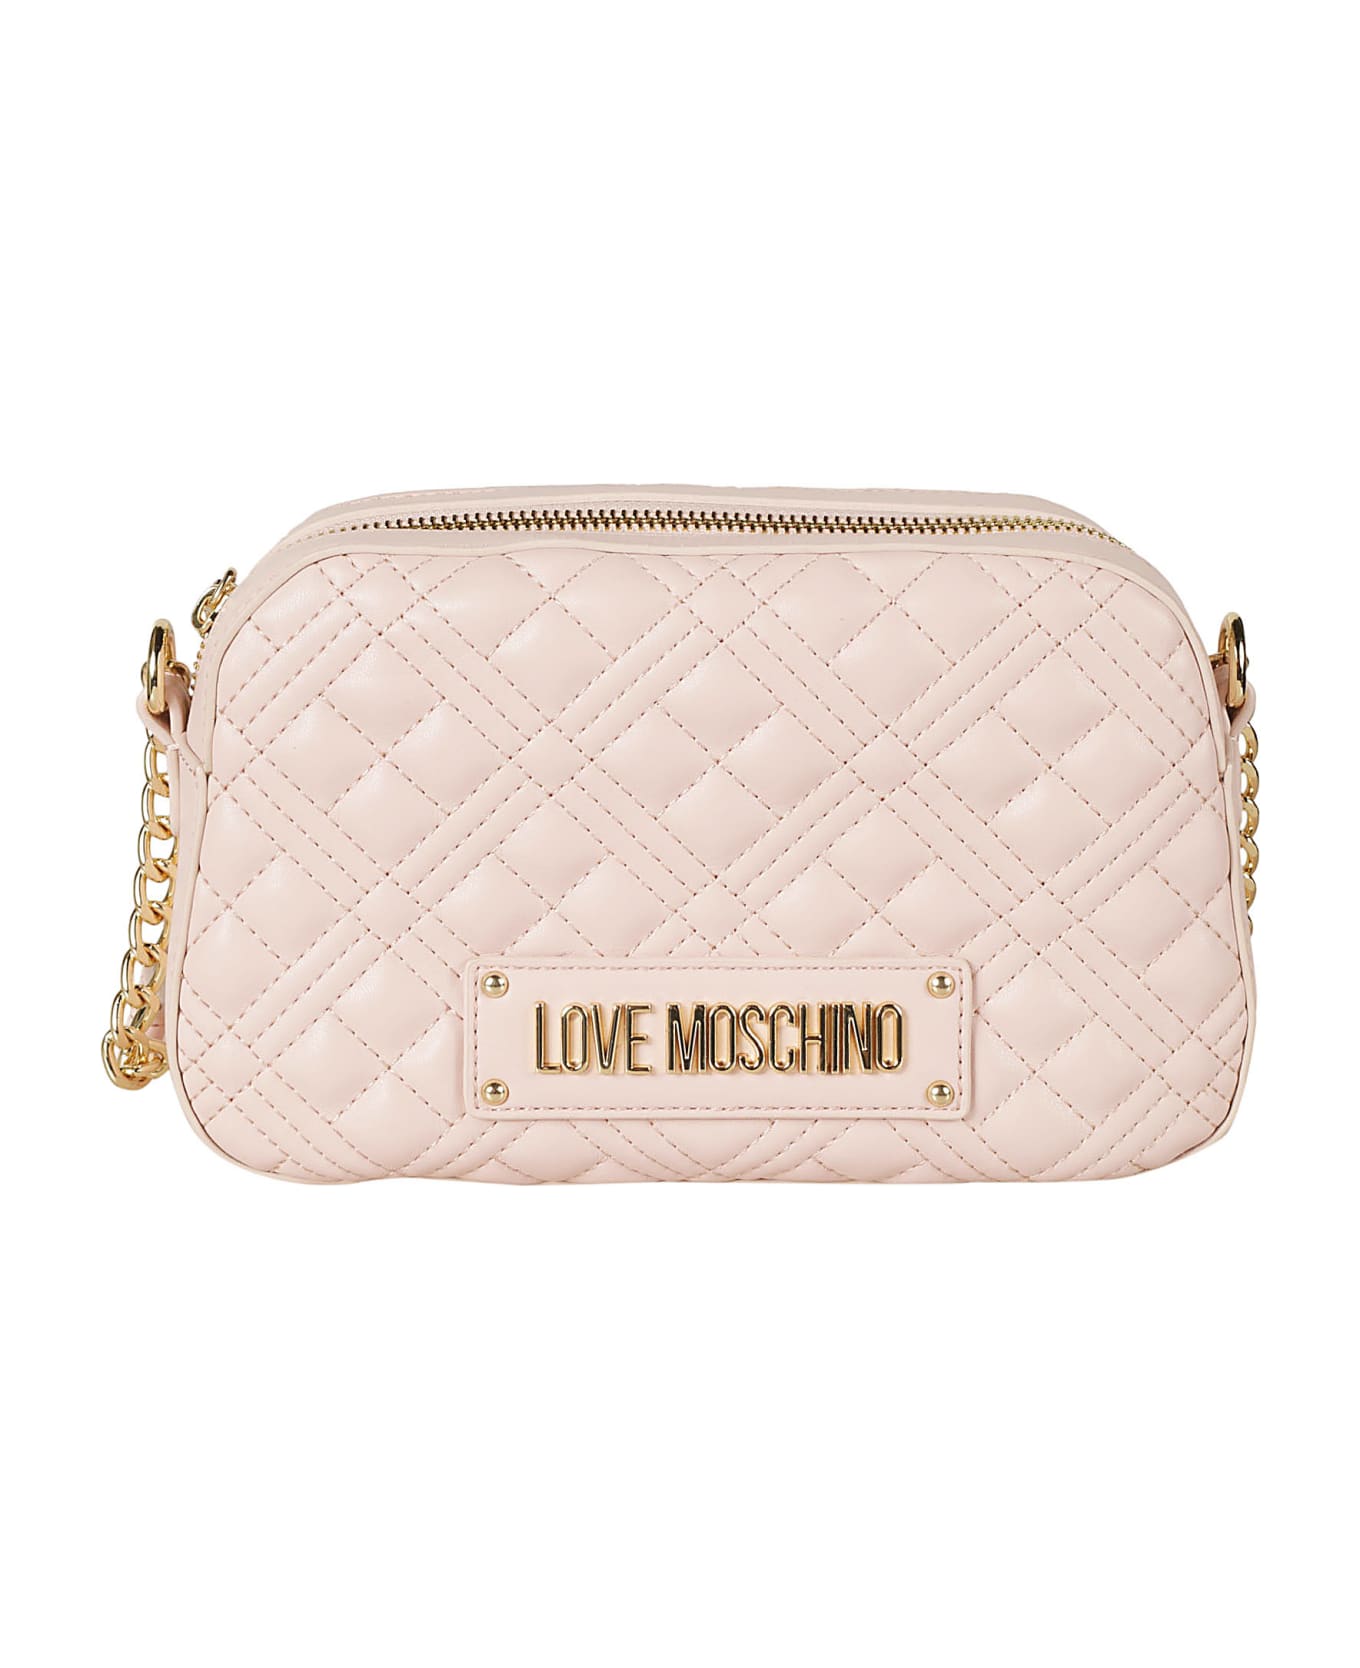 Love Moschino Top Zip Quilted Chain Shoulder Bag - Cipria